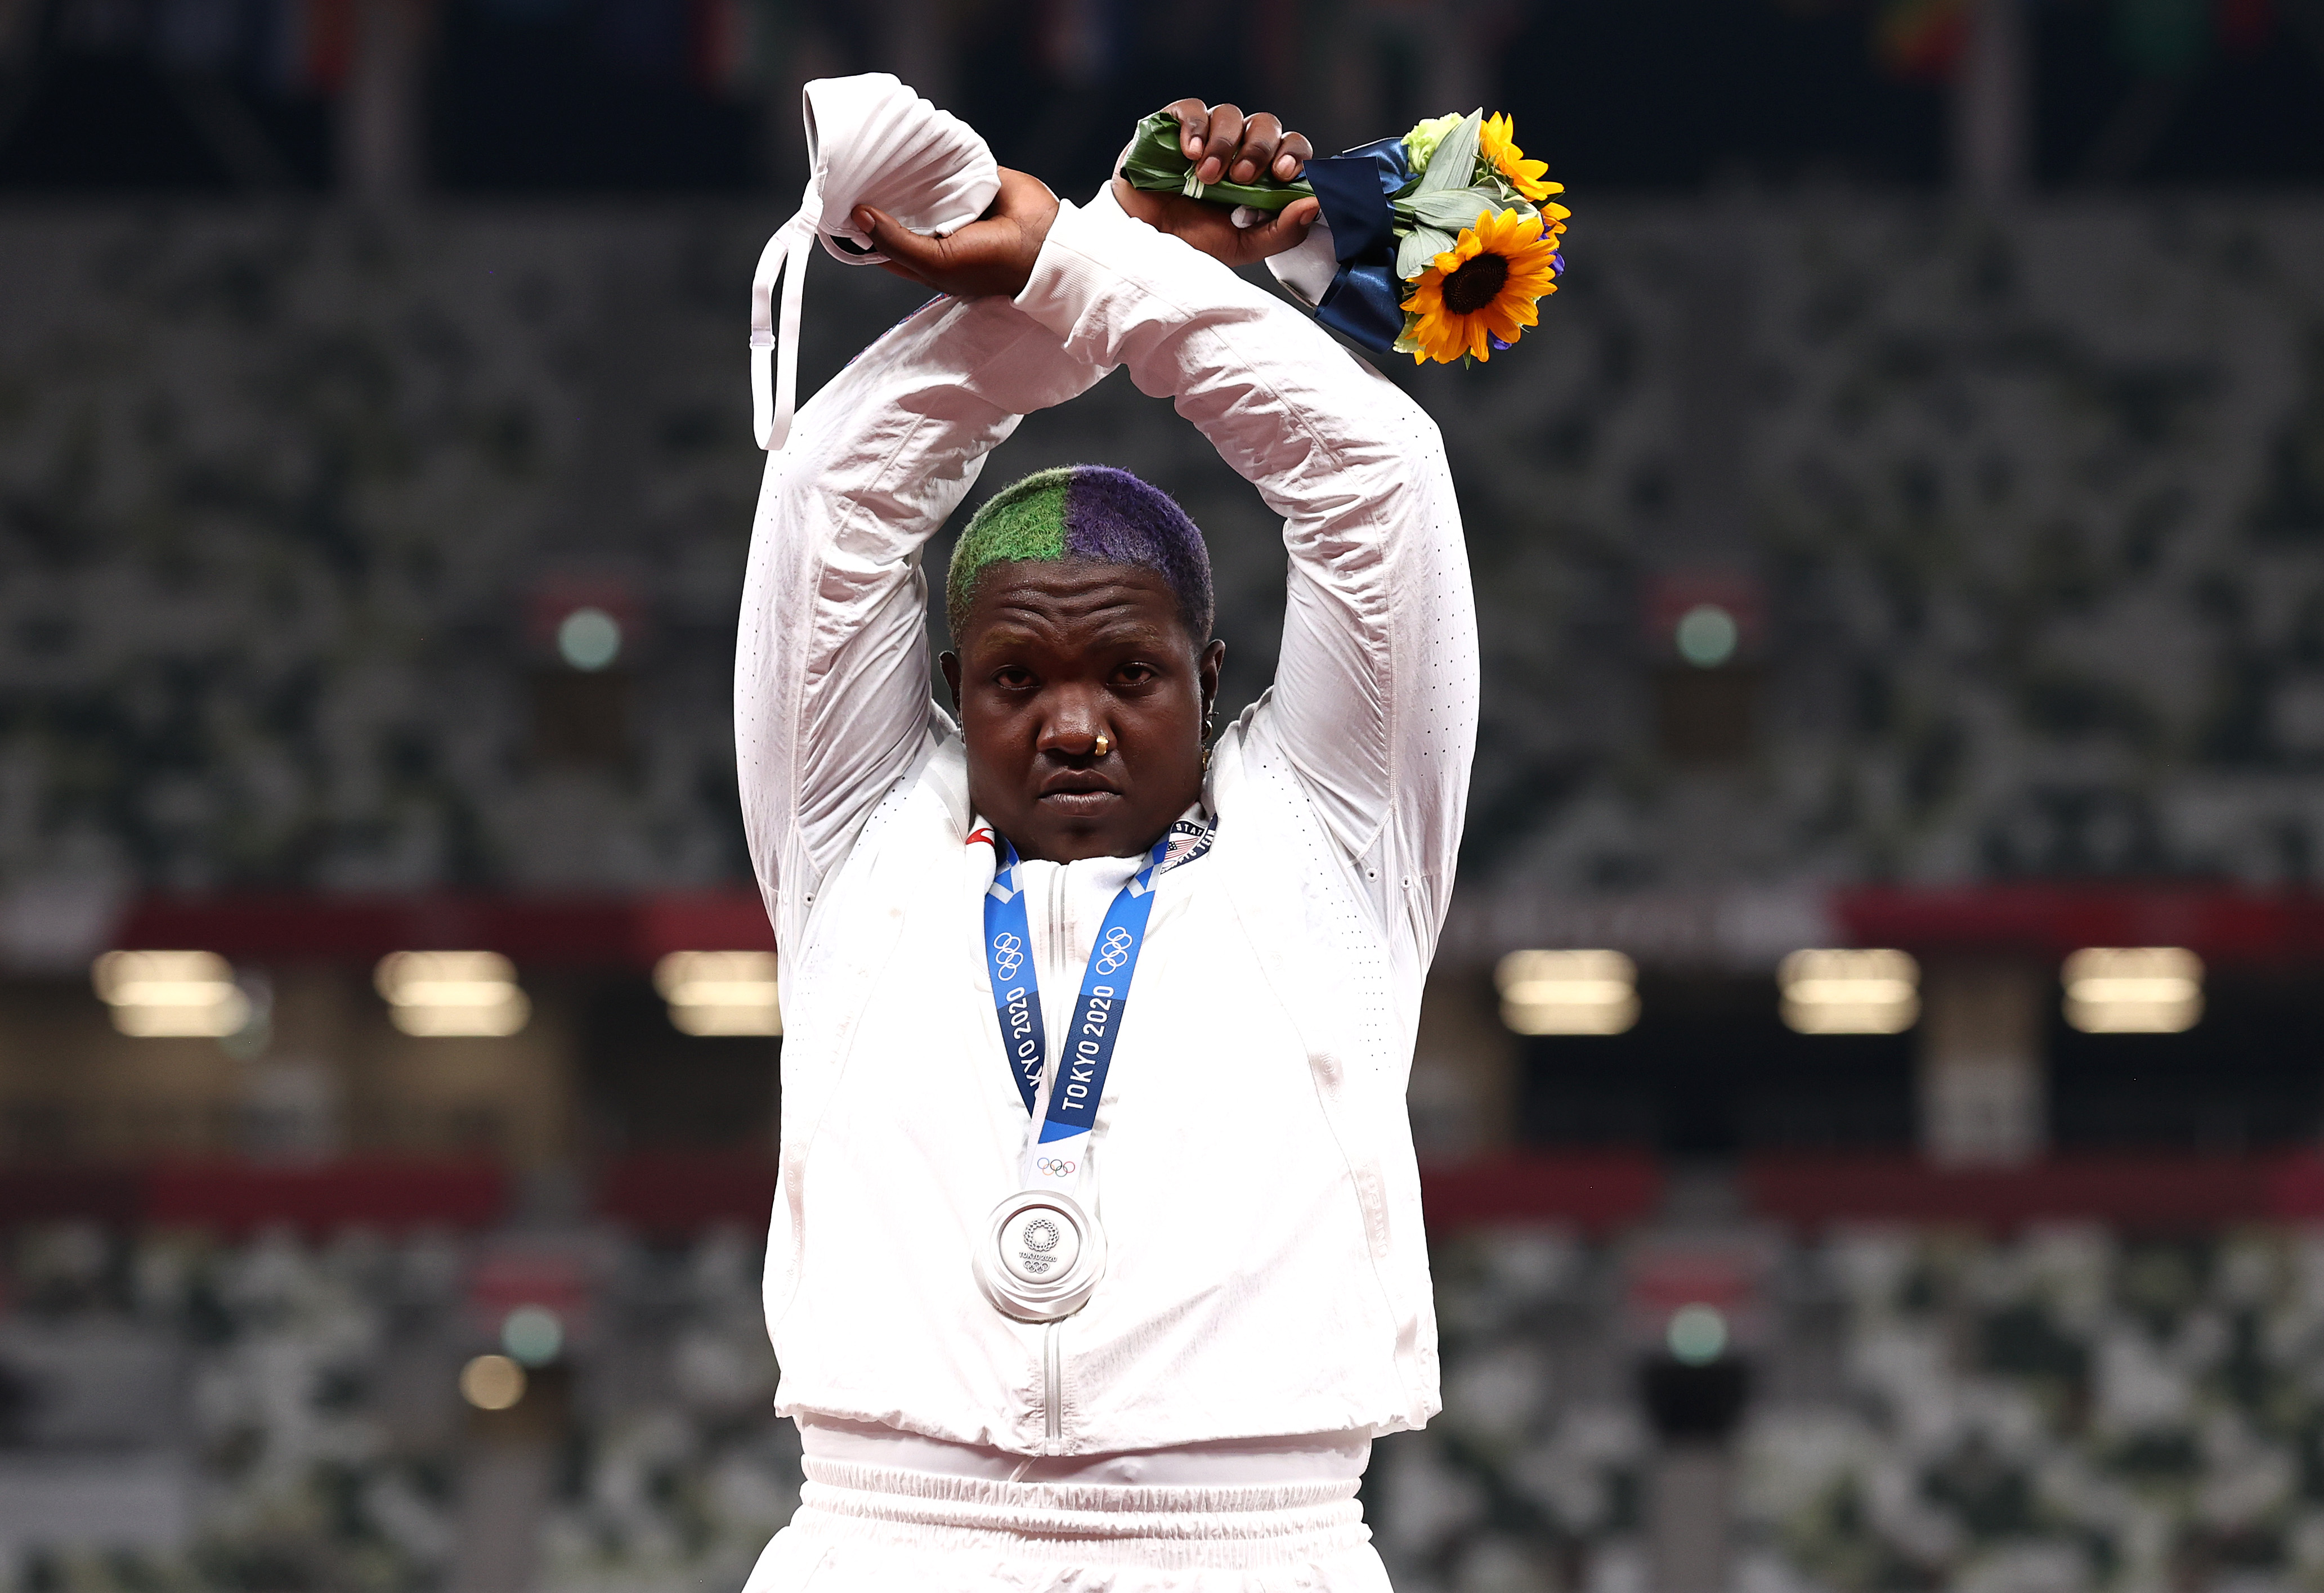 The United States' Raven Saunders makes an 'X' gesture during the medal ceremony for the women's shot put during the Tokyo Olympic Games in August 2021.